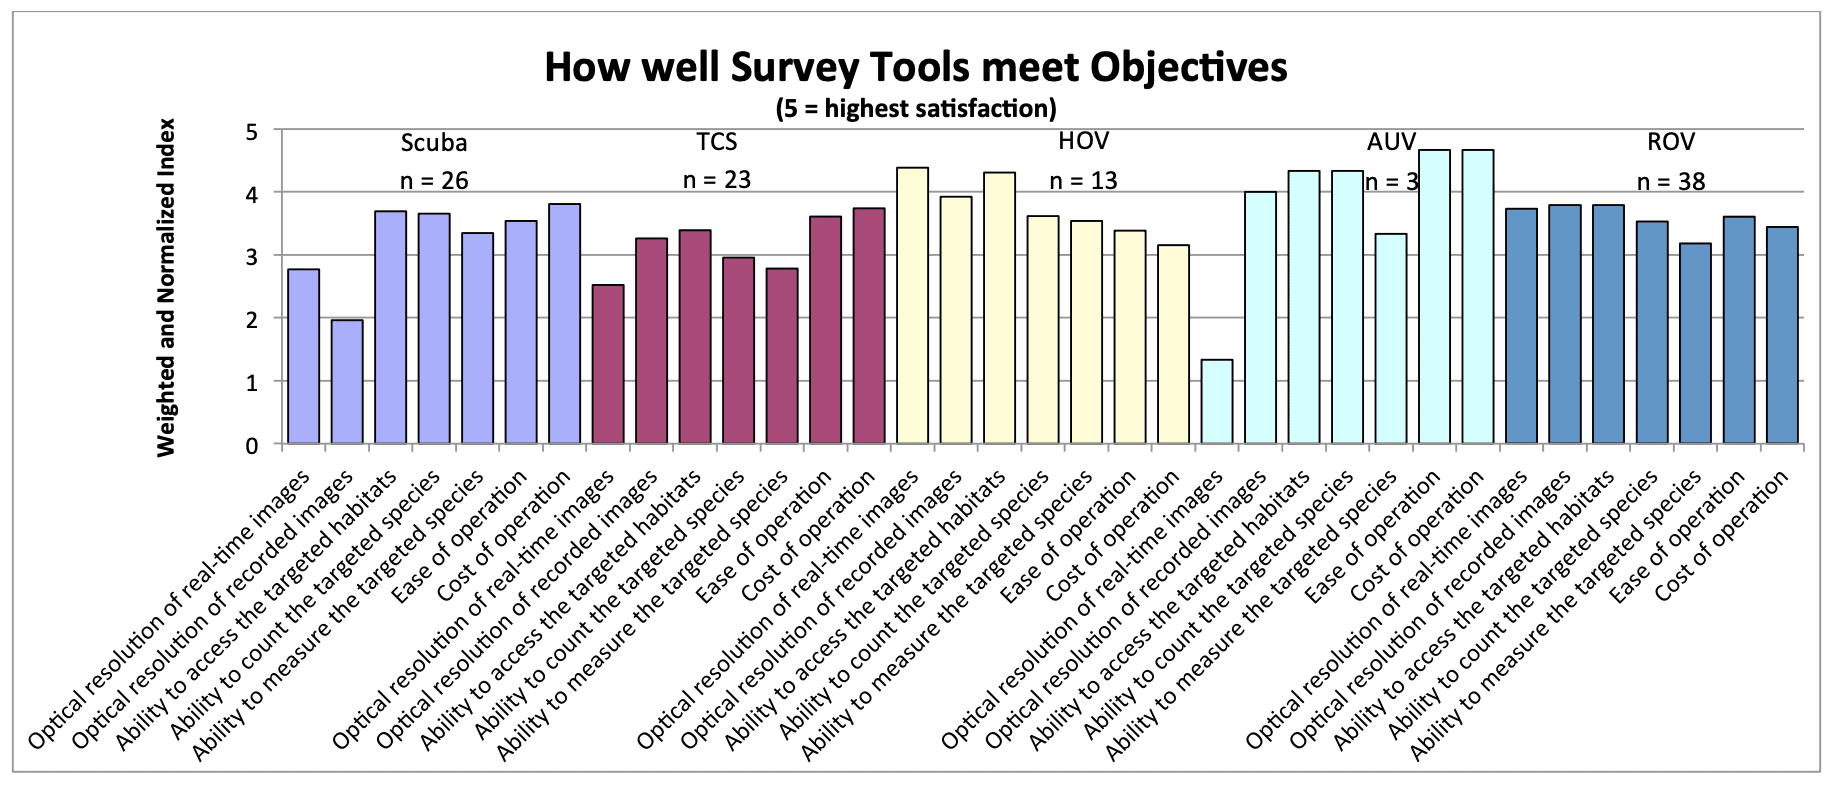 June 2015 - A COMPARATIVE ASSESSMENT OF UNDERWATER VISUAL SURVEY TOOLS: 37